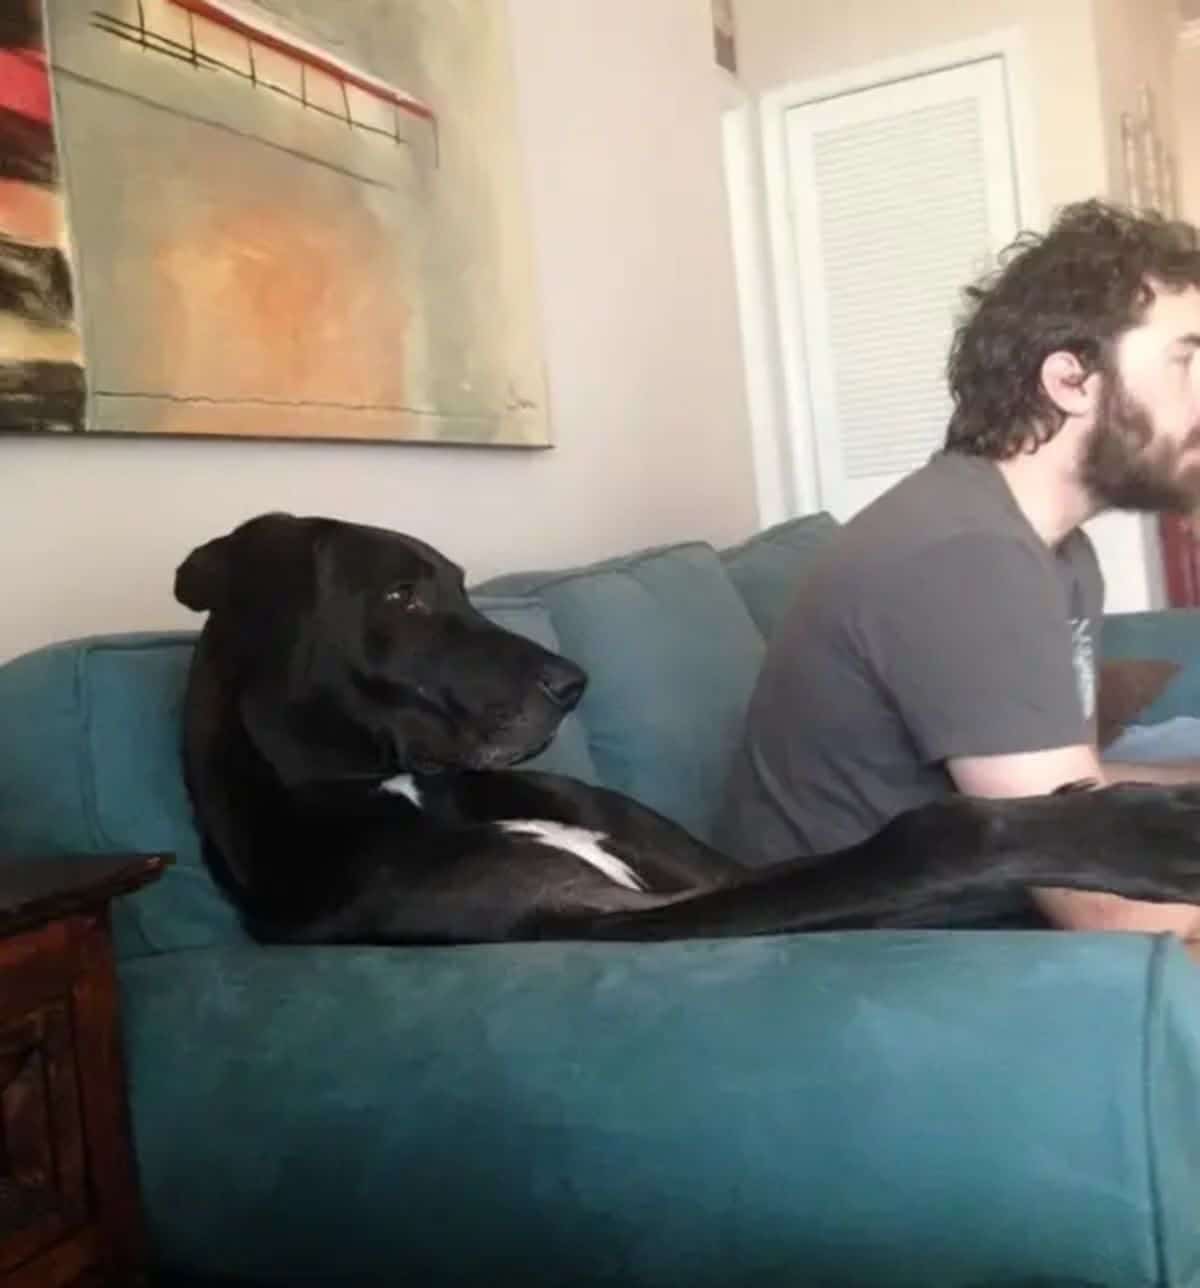 black and white dog sitting on a green sofa leaning against the arm rest next to a man